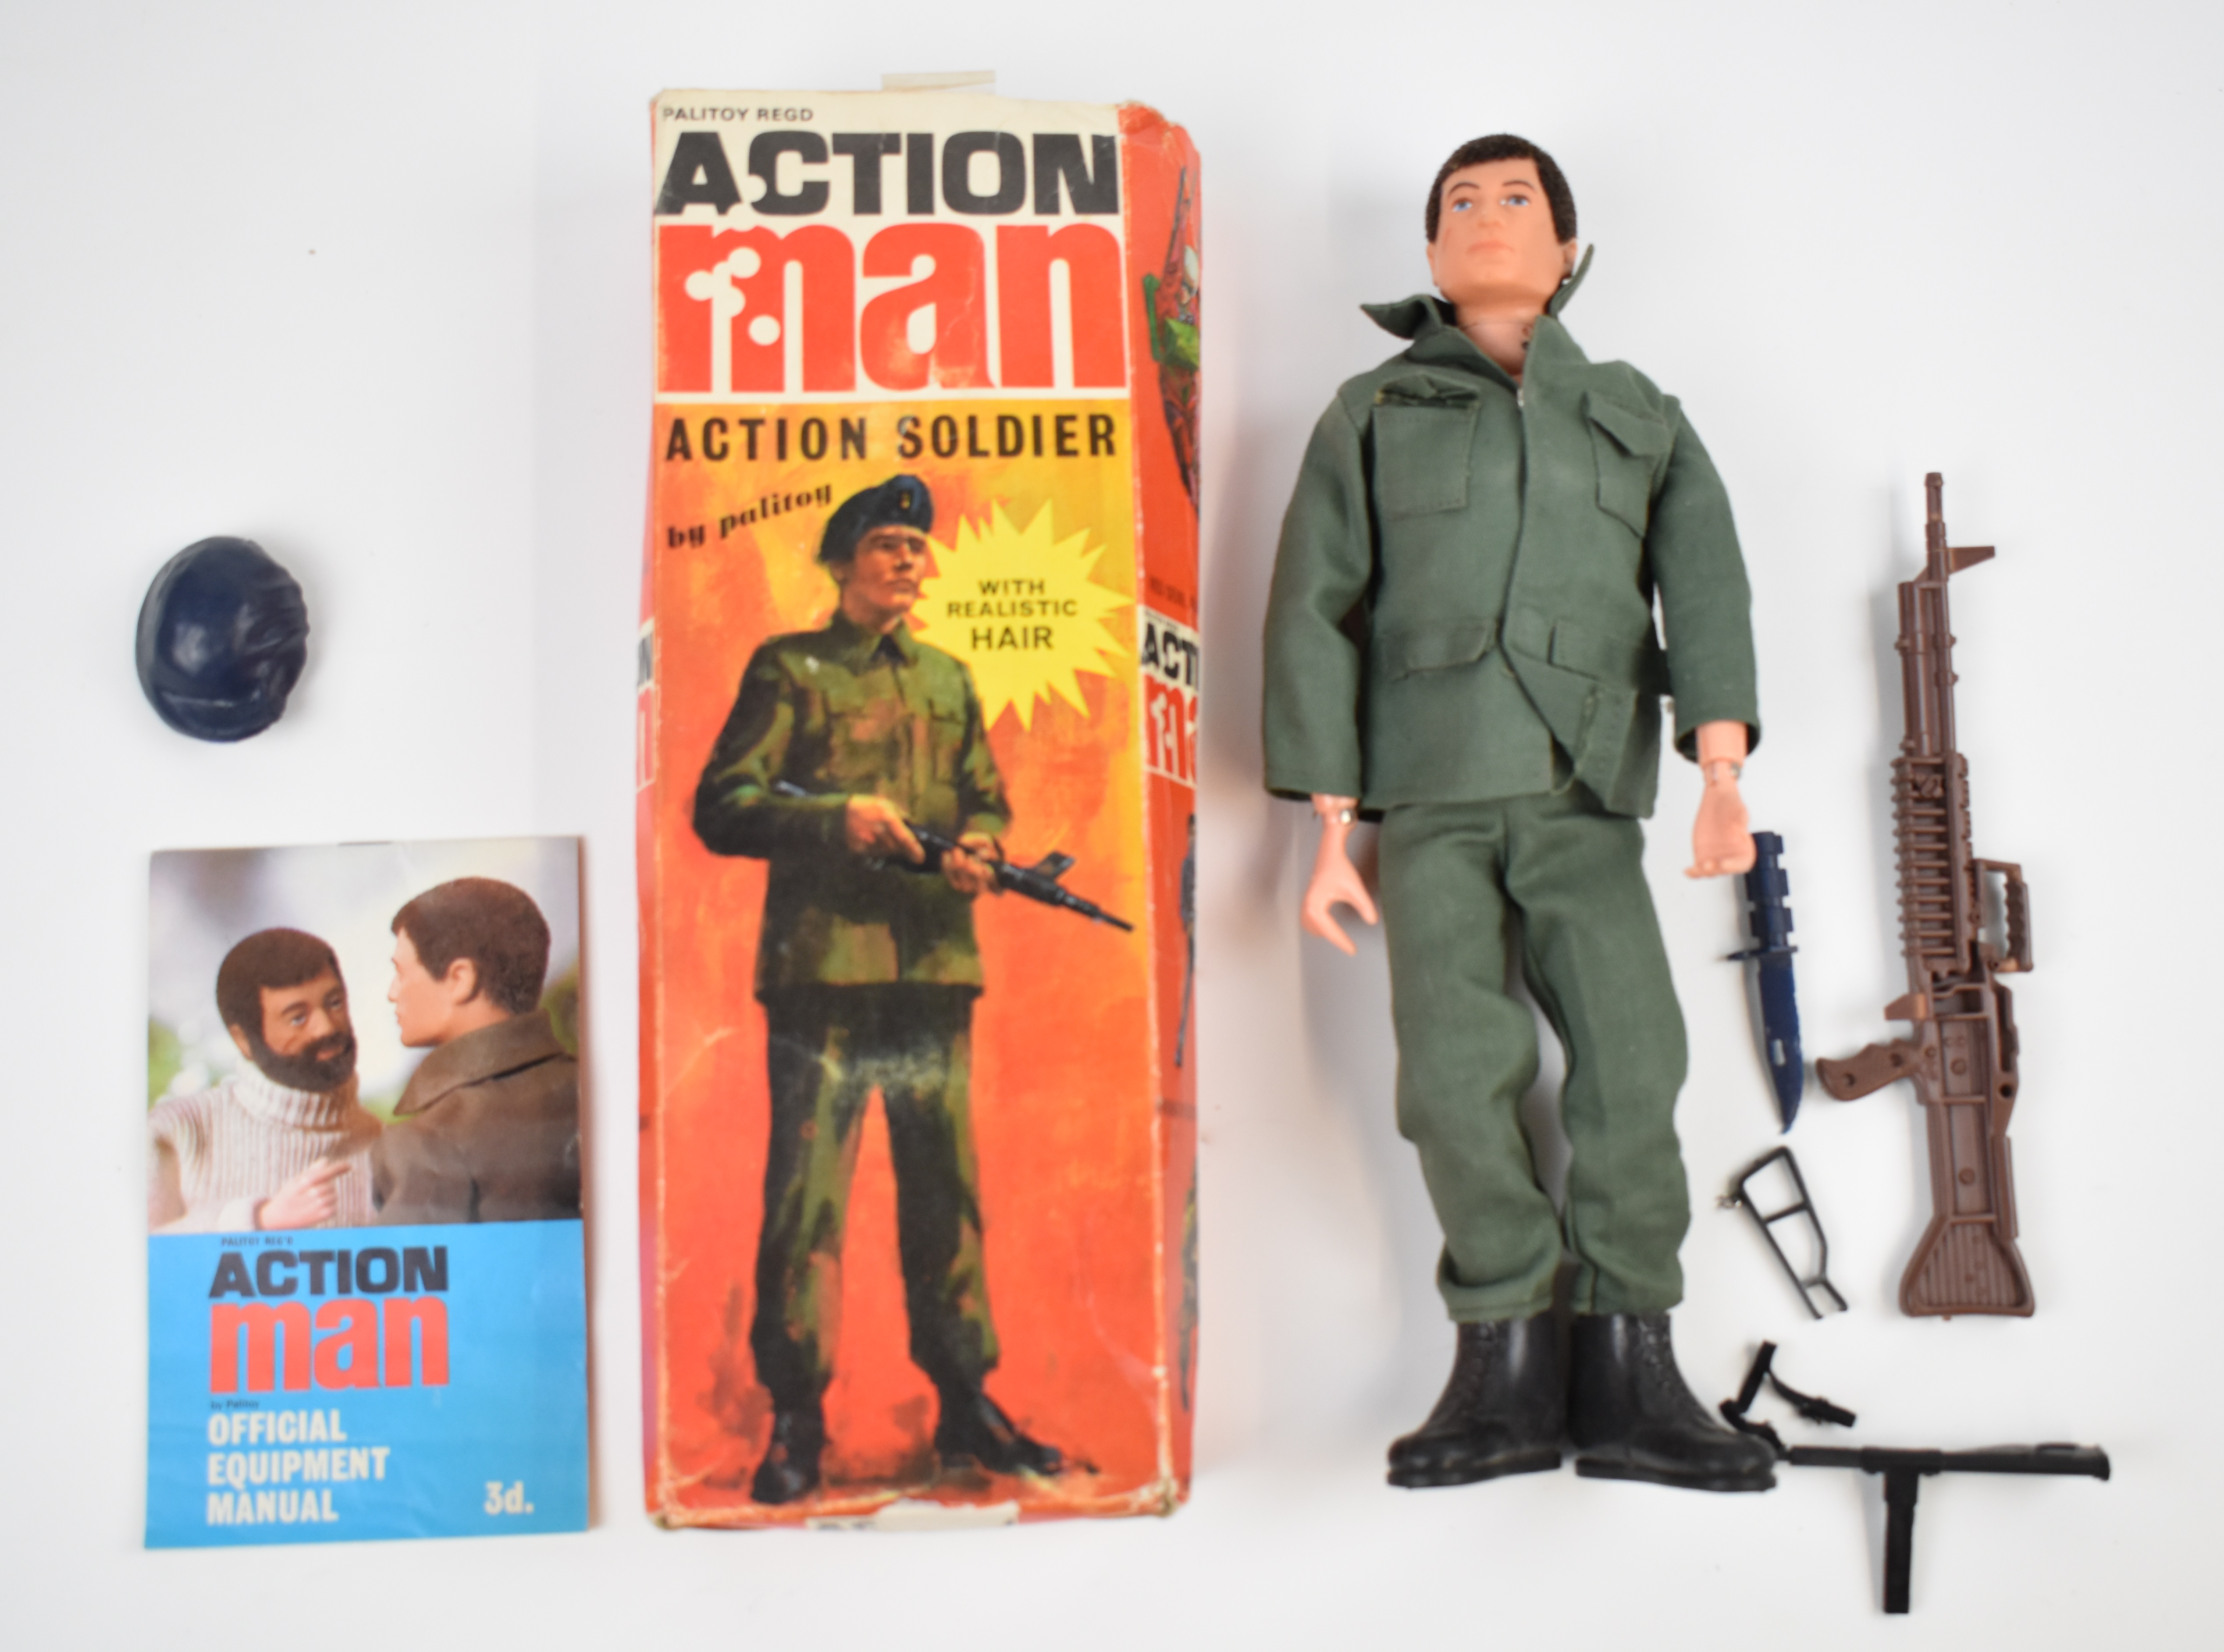 Palitoy Action Man 'Action Soldier' doll with clothing accessories and official equipment manual,